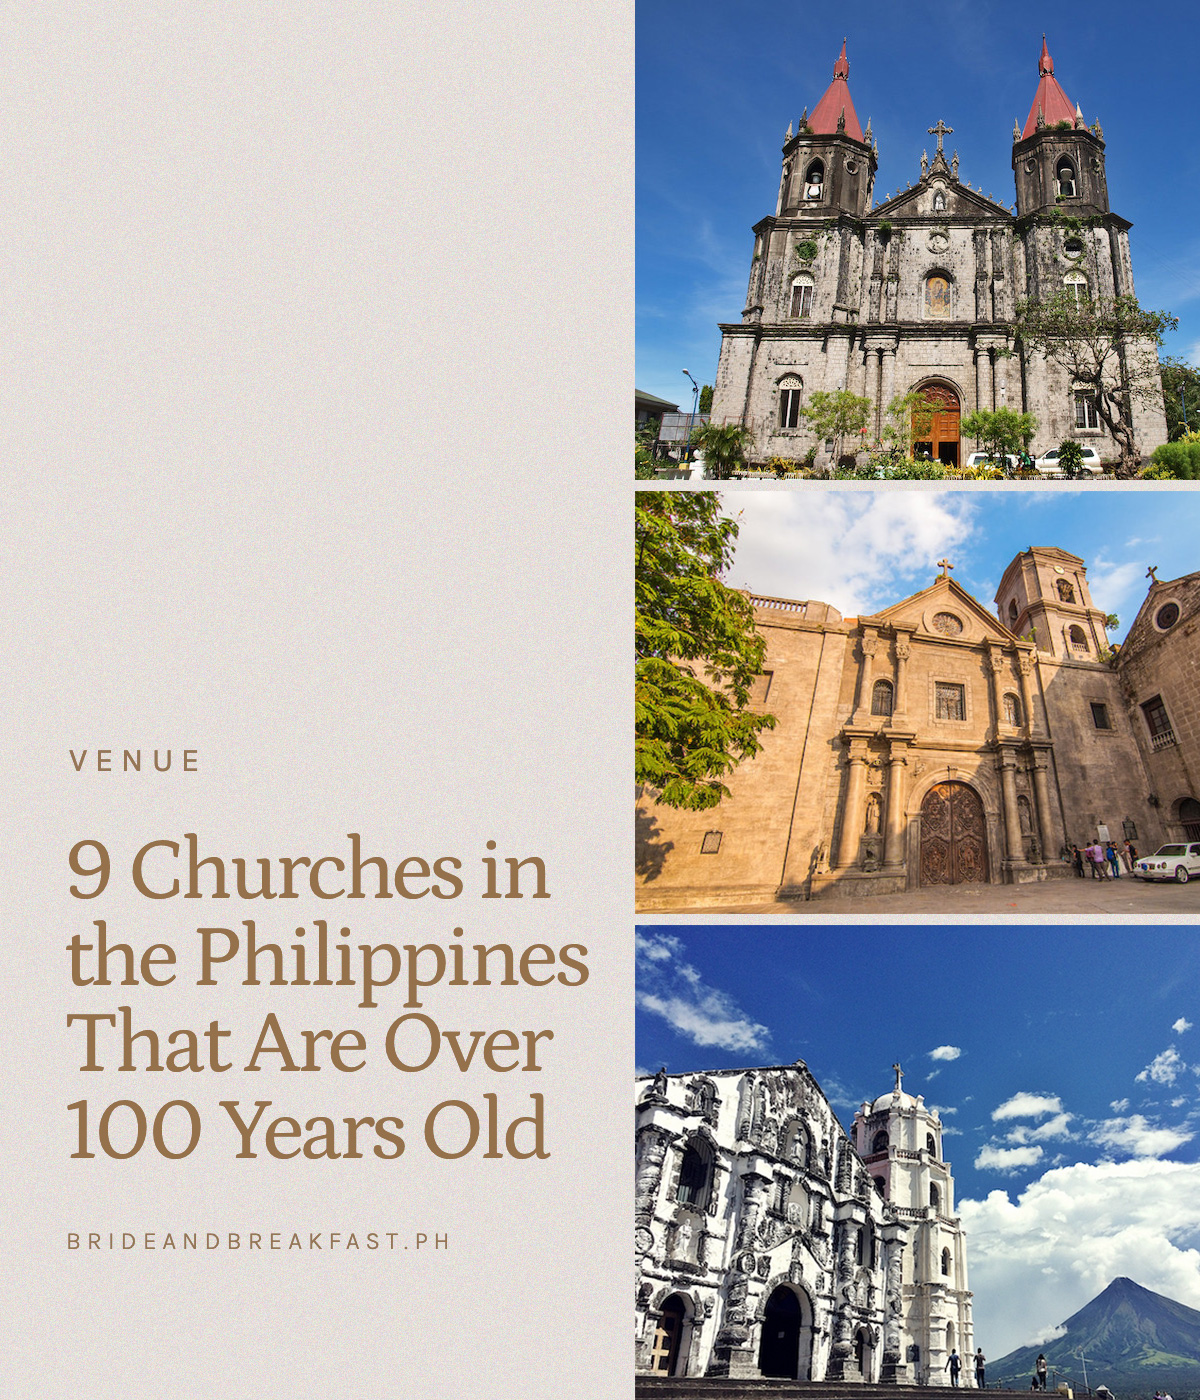 9 Churches in the Philippines That Are Over 100 Years Old